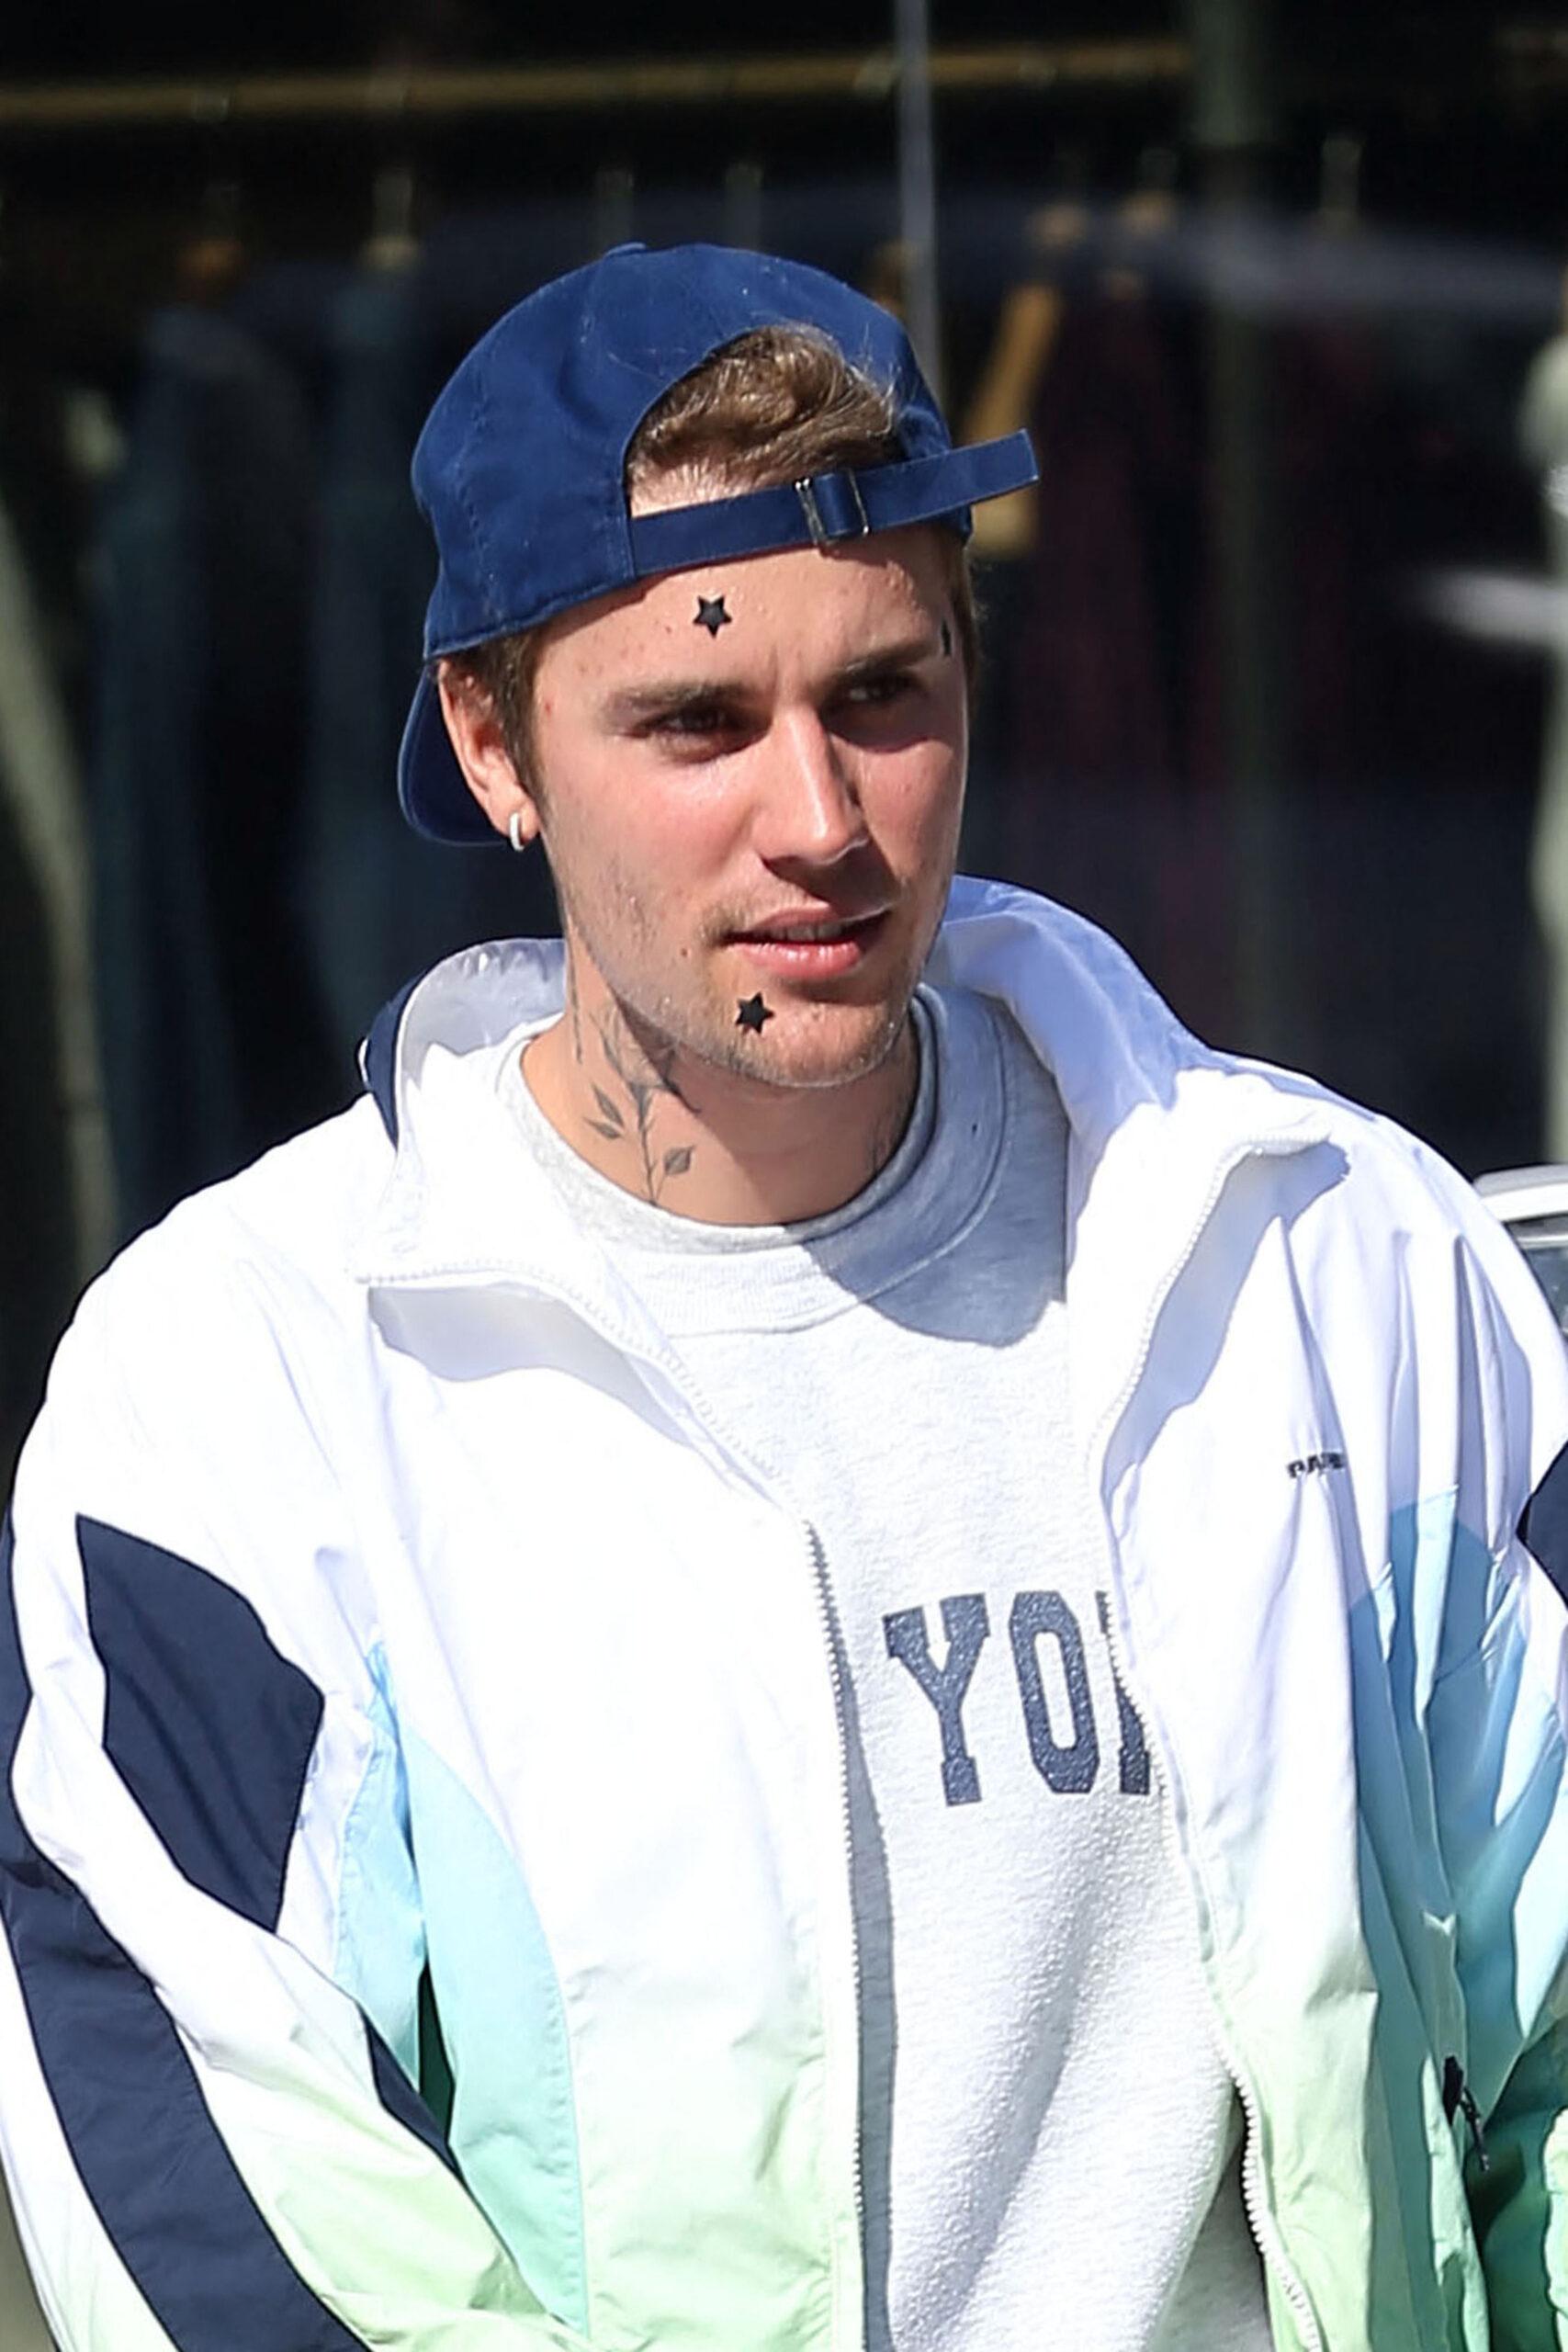 Justin Bieber emerged with three stickers on his face while in LA